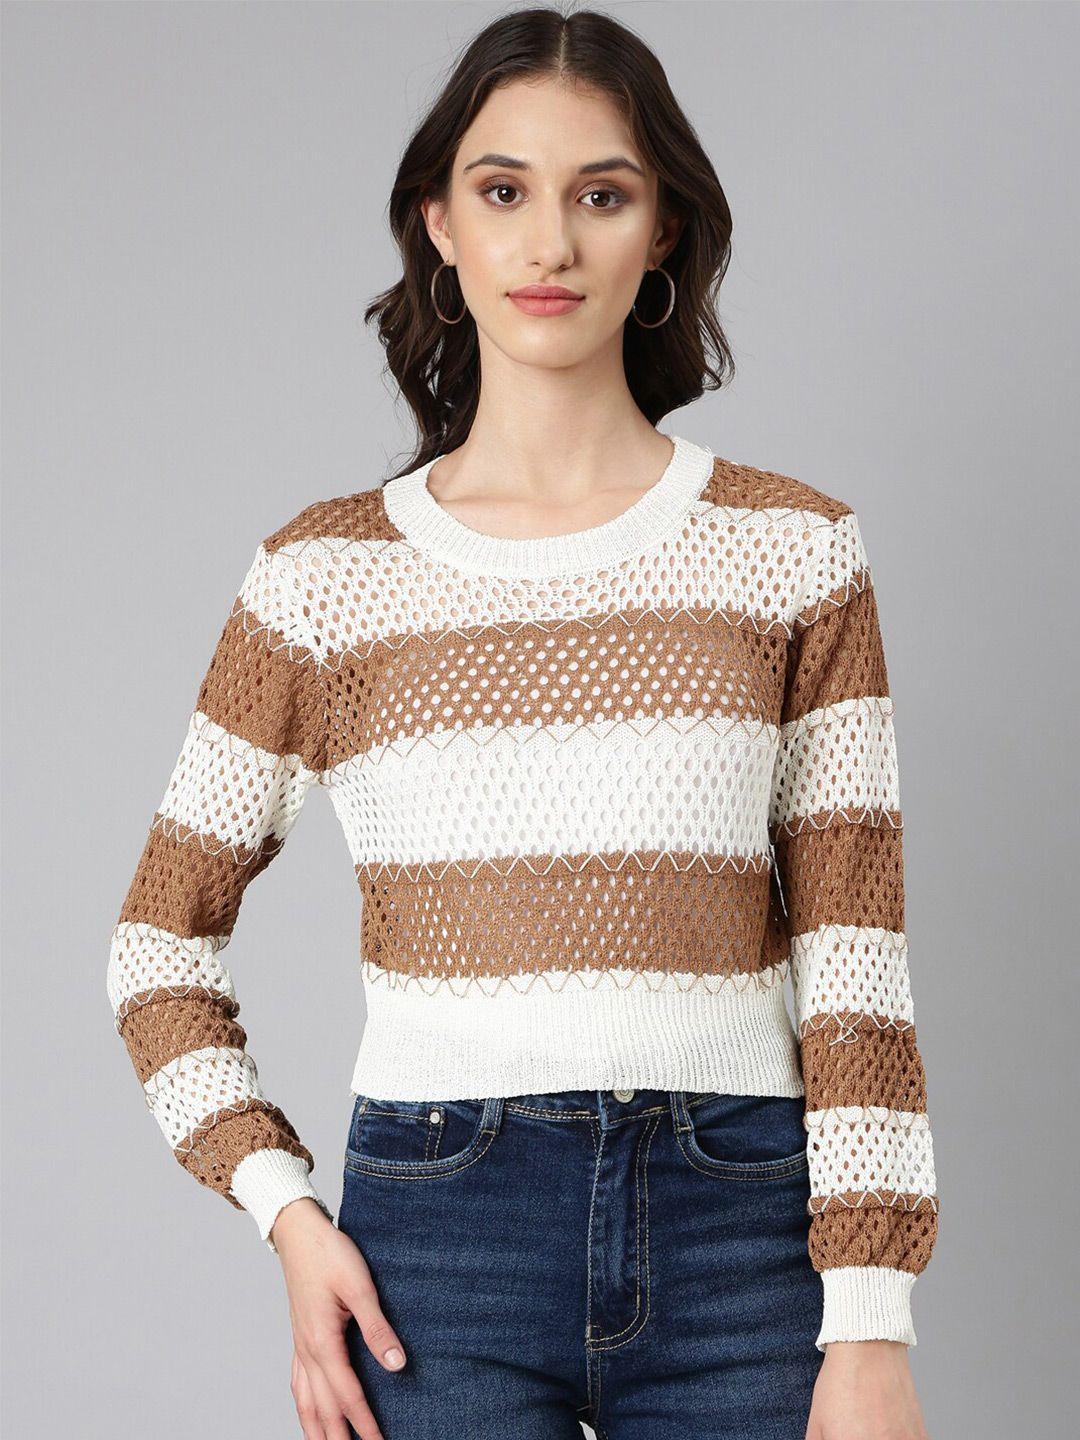 showoff-striped-long-sleeves-acrylic-top